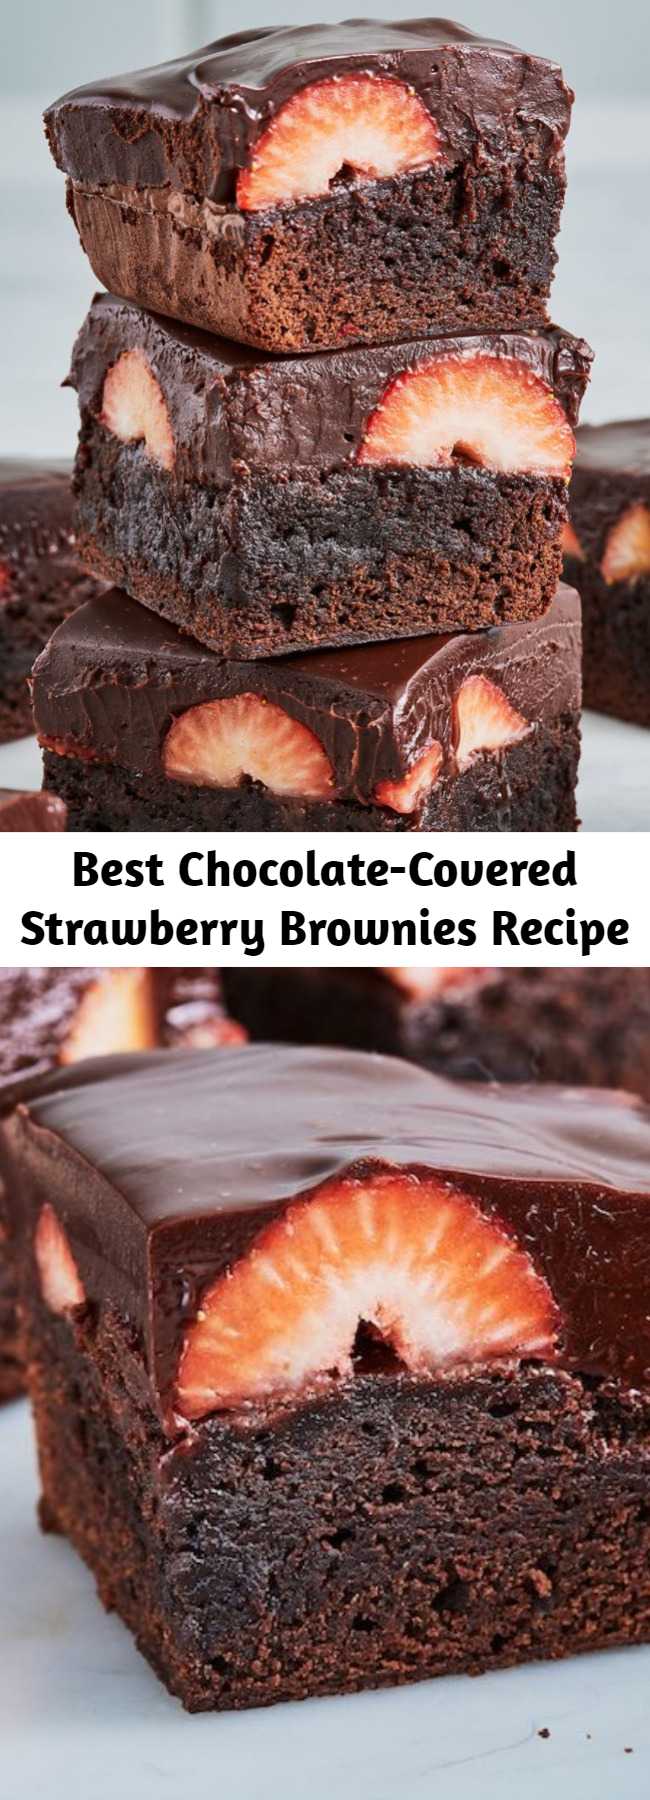 Best Chocolate-Covered Strawberry Brownies Recipe - Love at first bite. #food #easyrecipe #baking #brownies #dessert